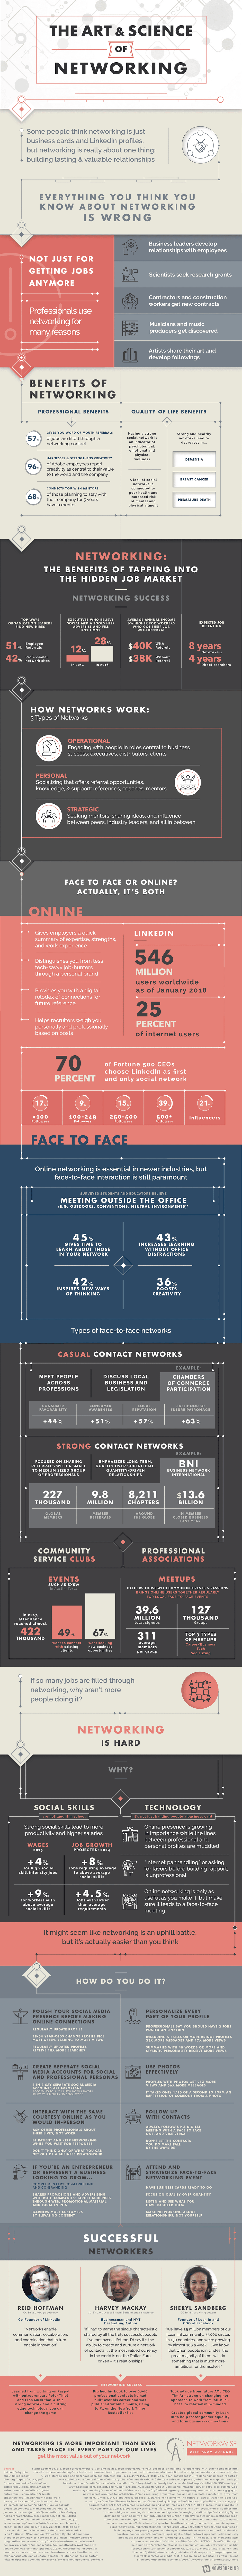 The Art and Science of Networking - #infographic